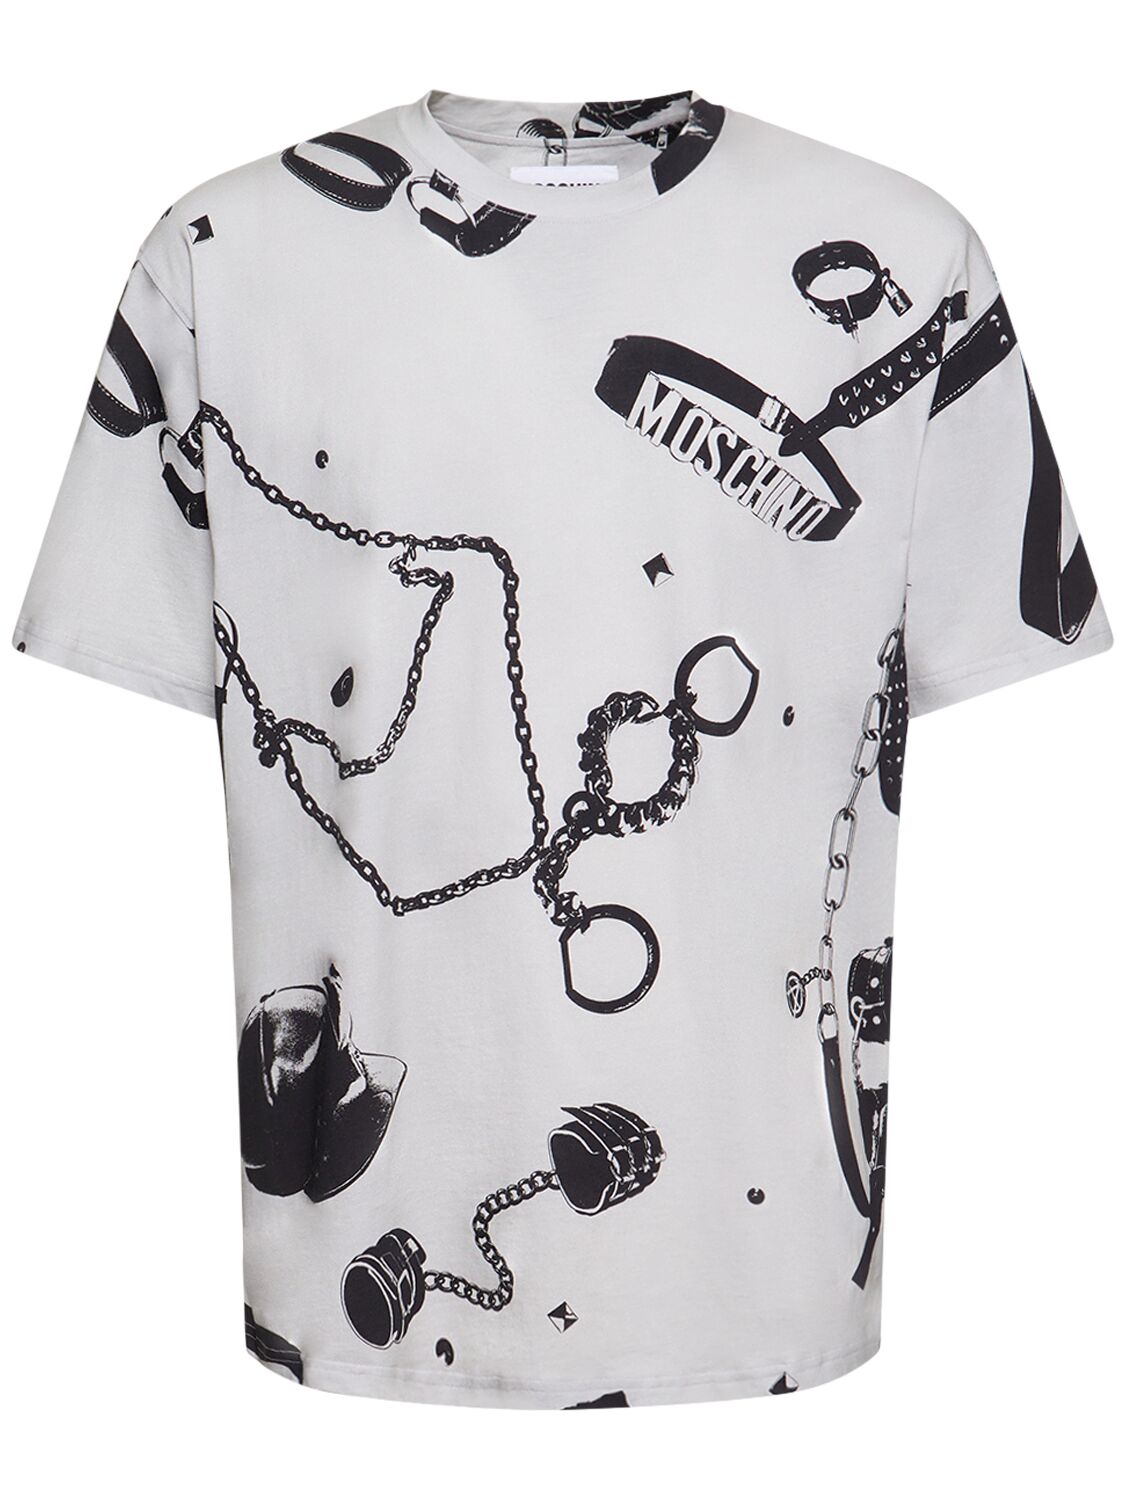 Moschino T-shirt With Logo in Black for Men